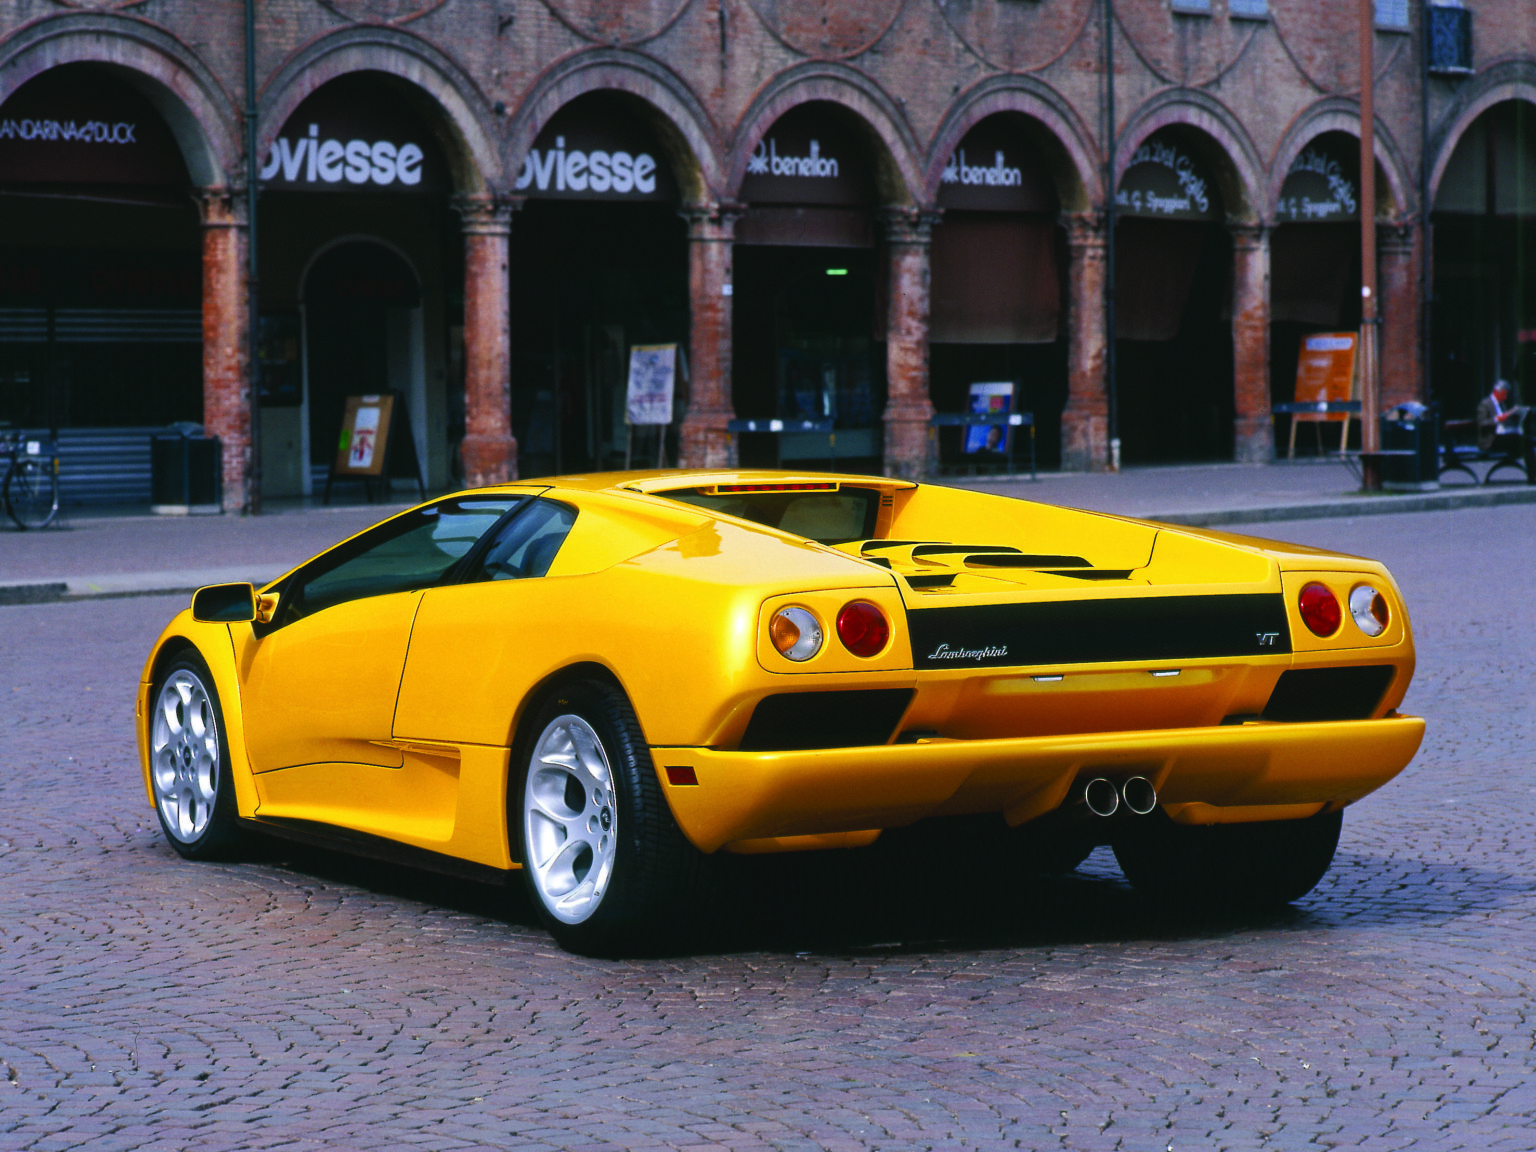 The diablo ruled the Lamborghini roost in the 1980s and 1990s.